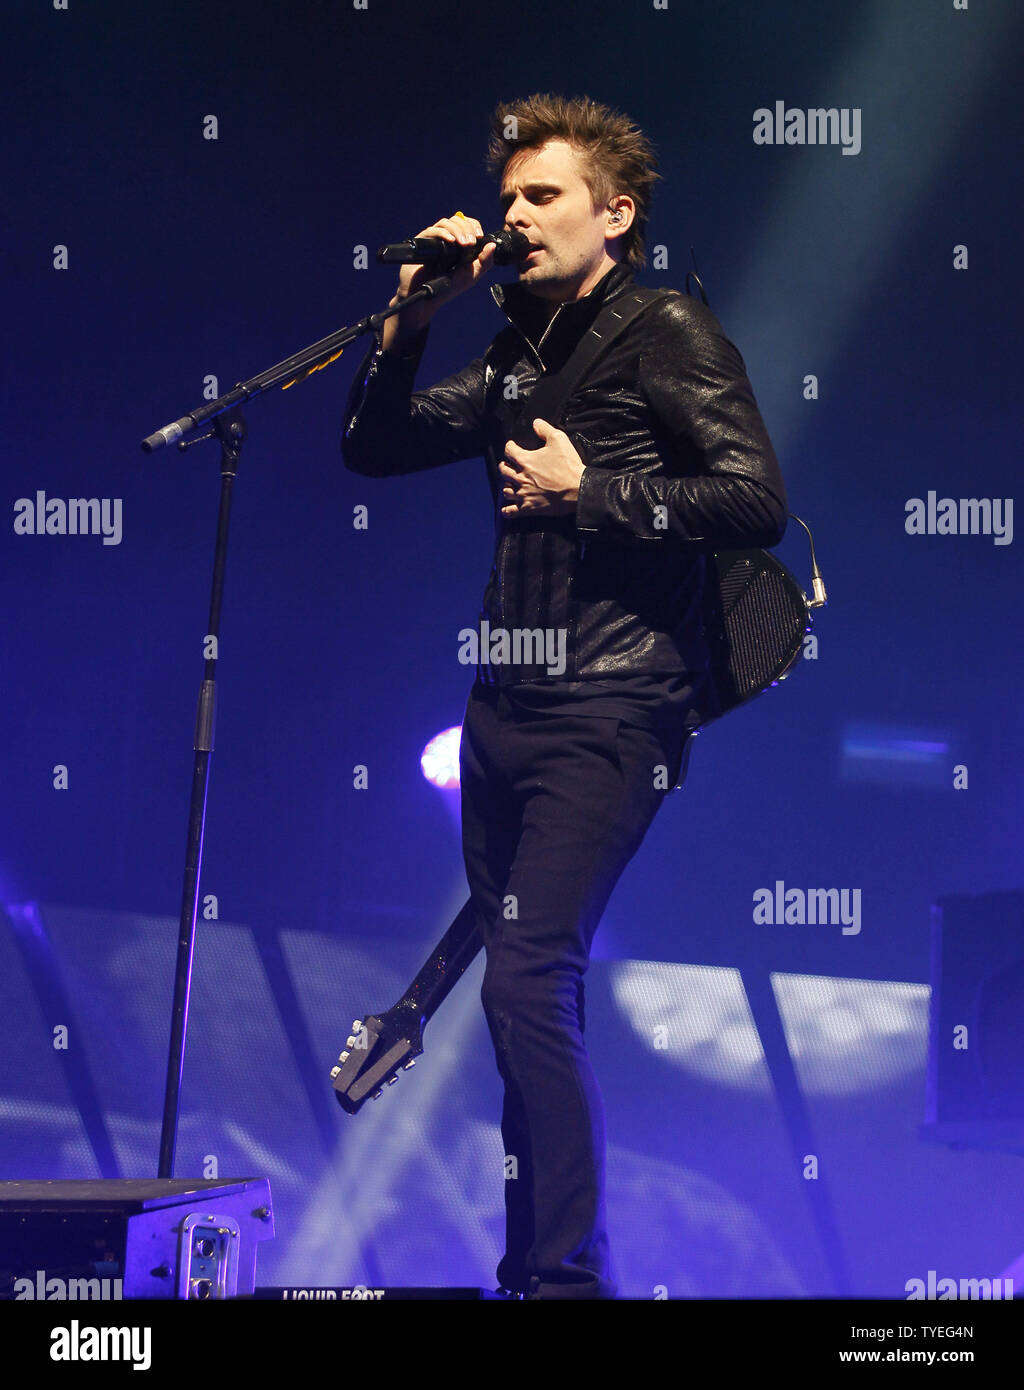 Matthew Bellamy with Muse performs in concert at the BB & T Center in Sunrise, Florida on February 22, 2013.  UPI/Michael Bush Stock Photo